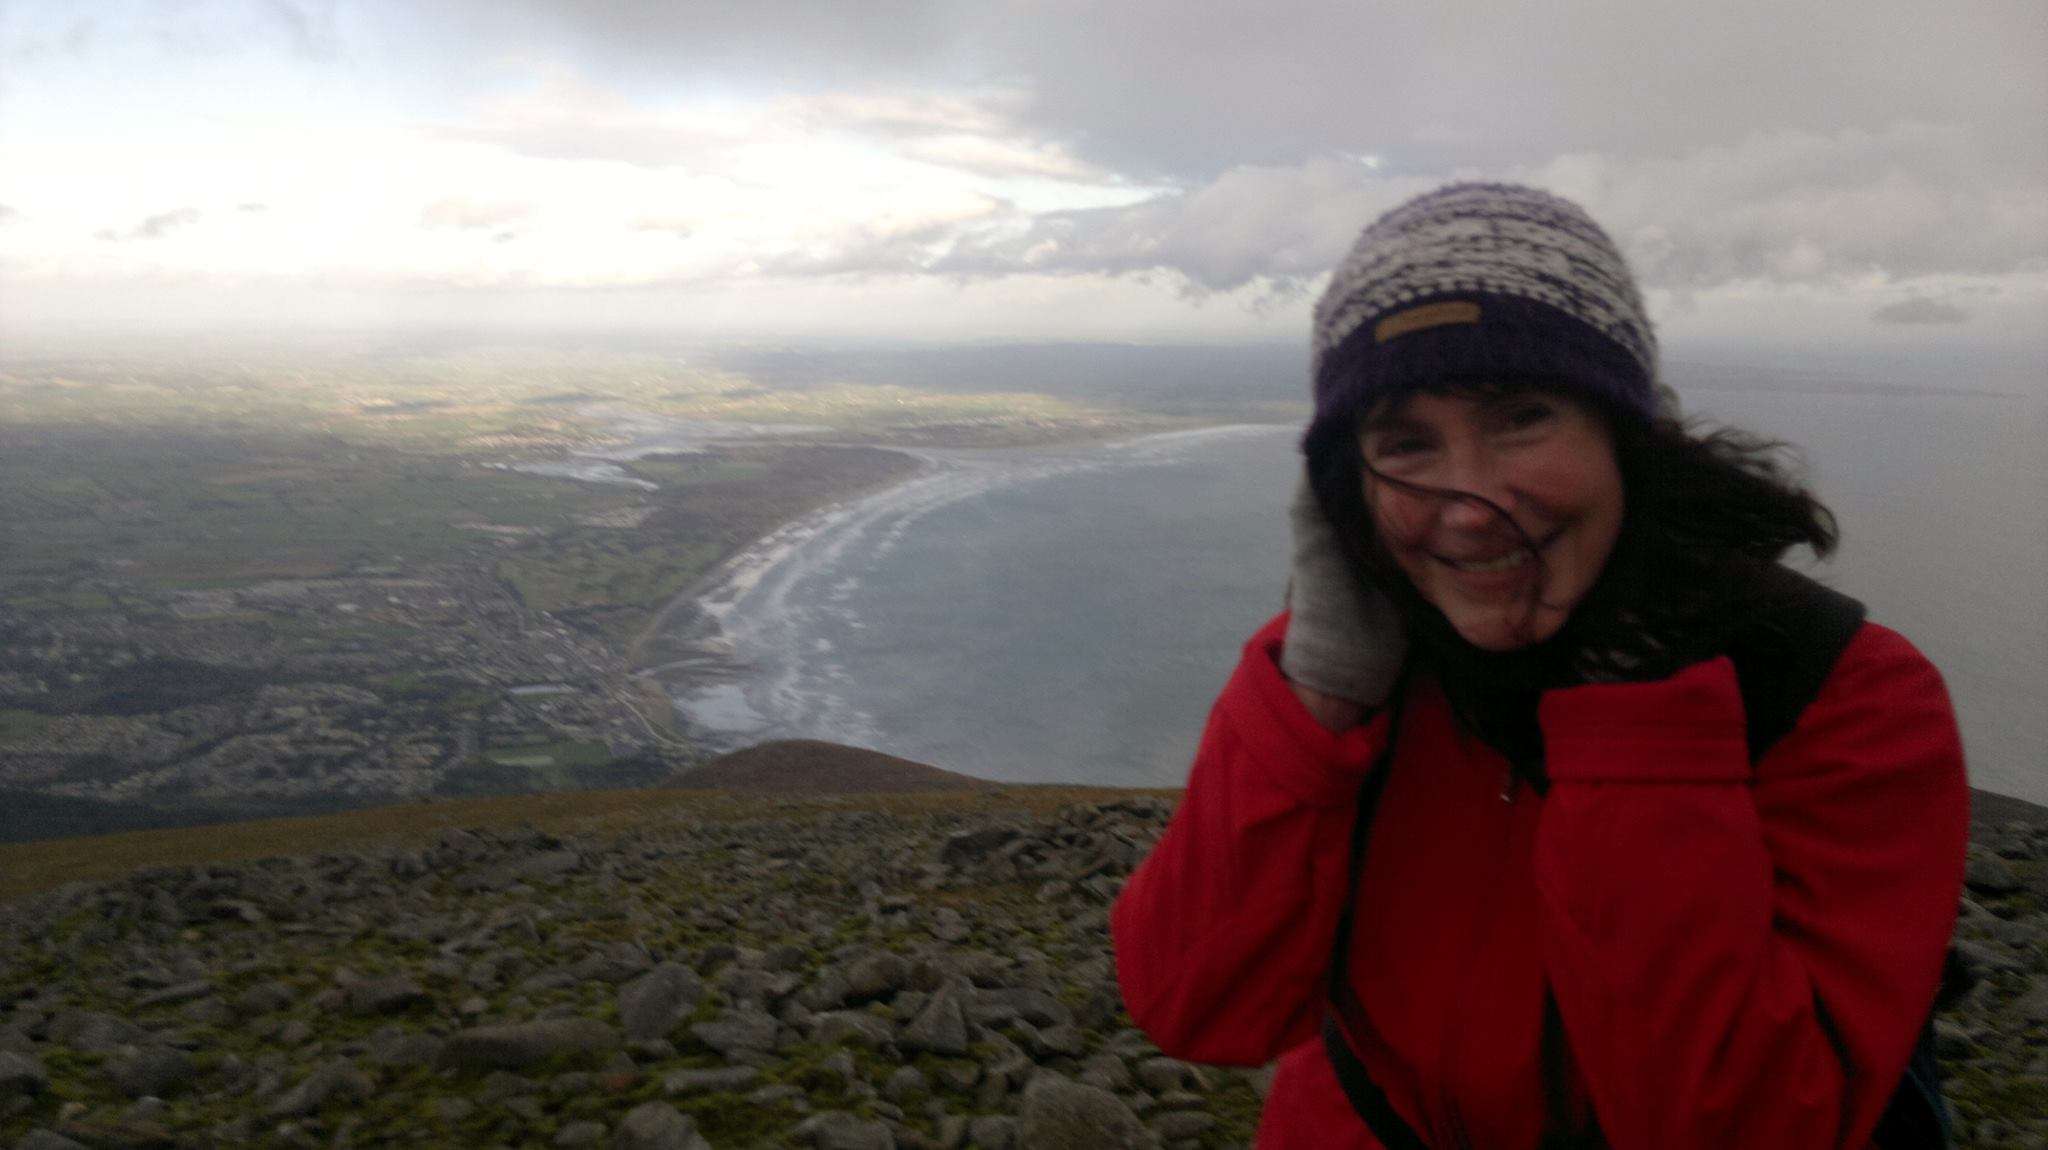 Ann Marie Dunne on mountain with county Down coastline in background